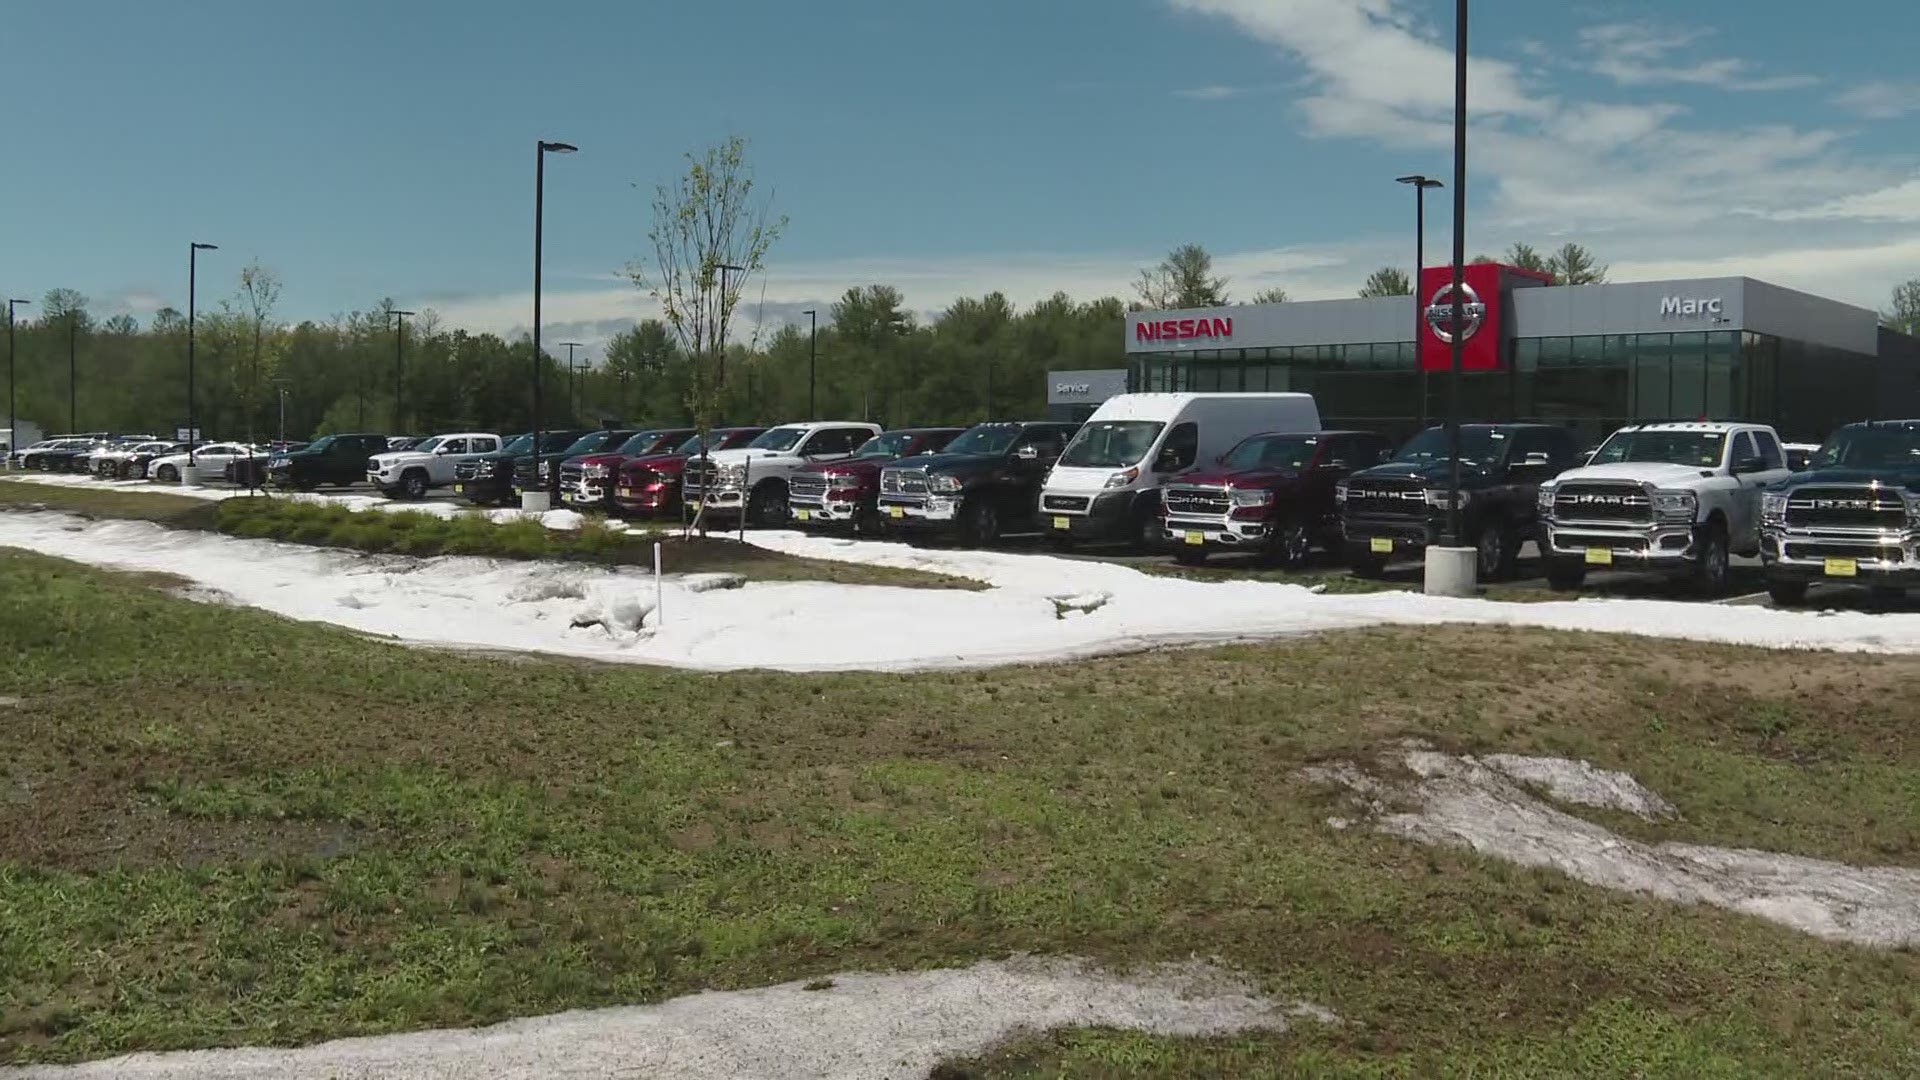 A hail storm that ripped through Southern Maine on Tuesday left every vehicle in the Marc Motors' lot in Sanford damaged, according to the company's vice president.